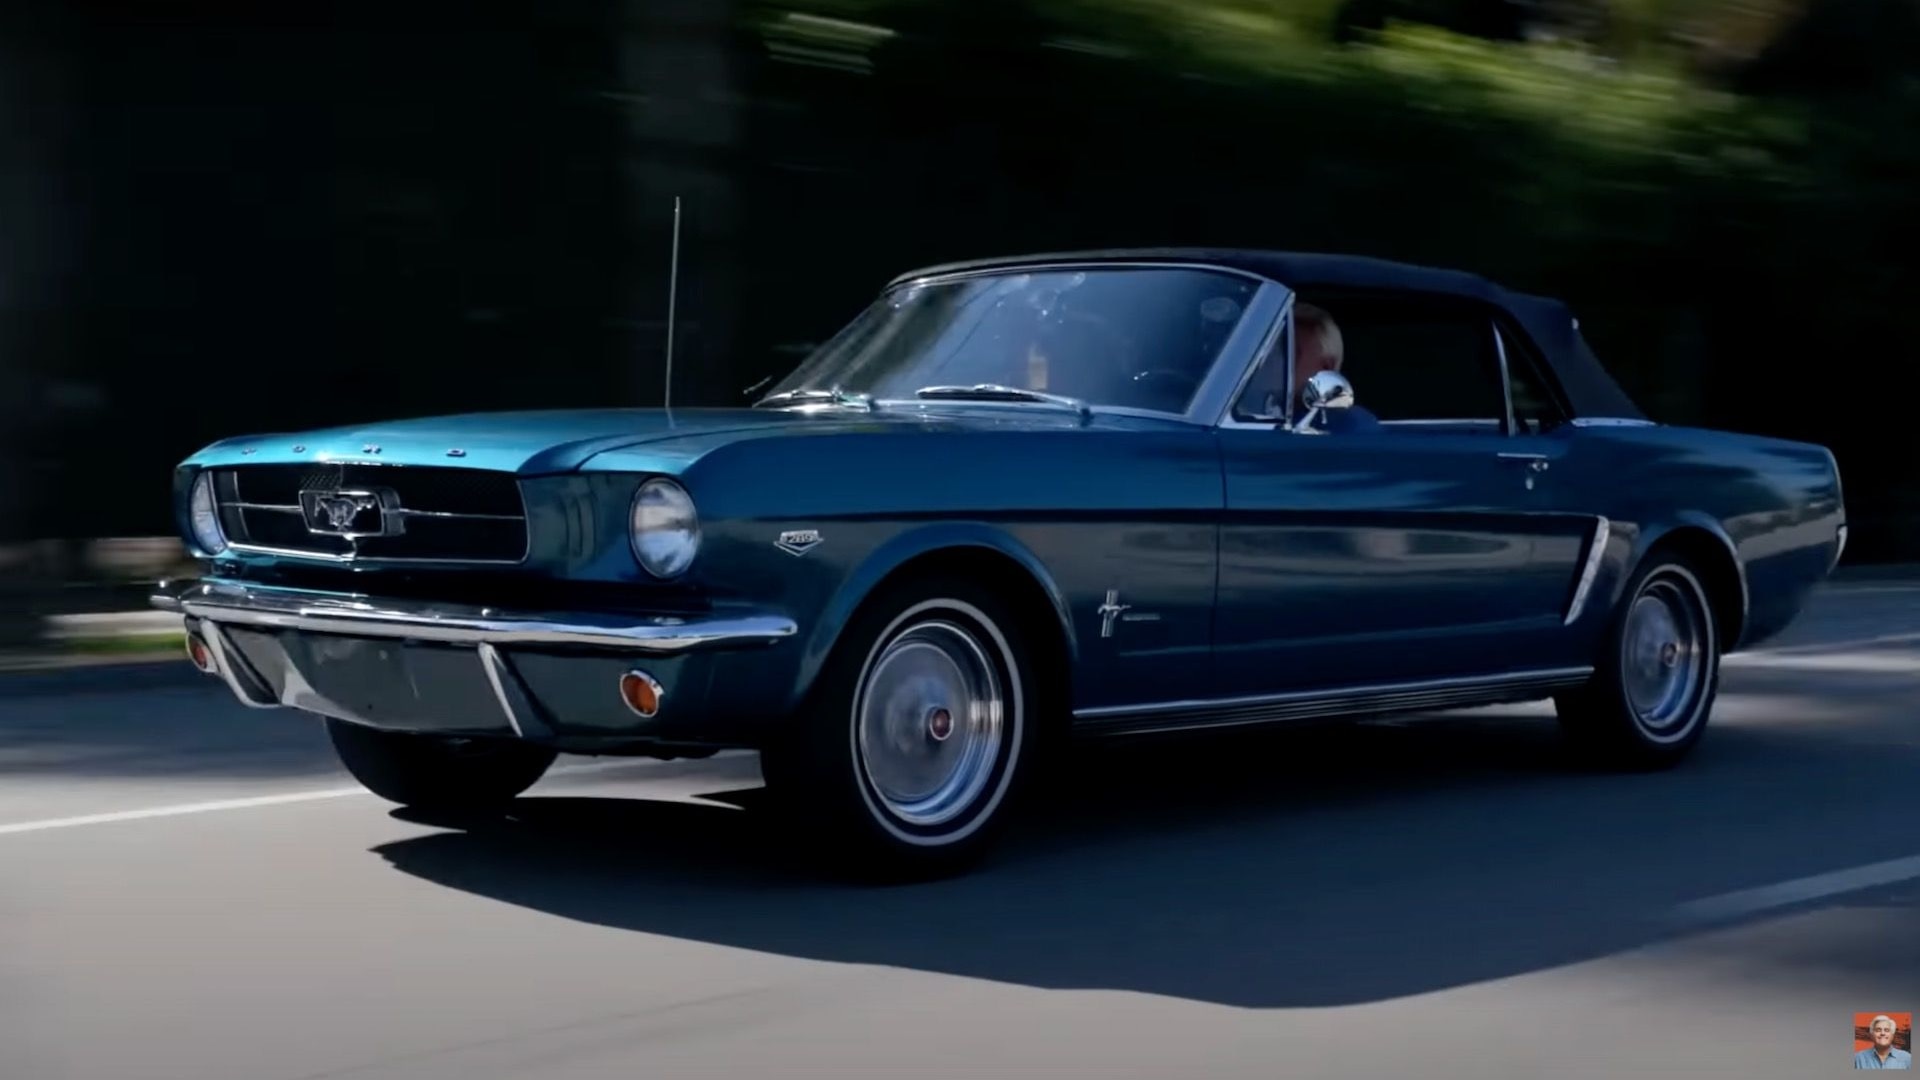 1964 1/2 Ford Mustang K-Code convertible on Jay Leno's Garage